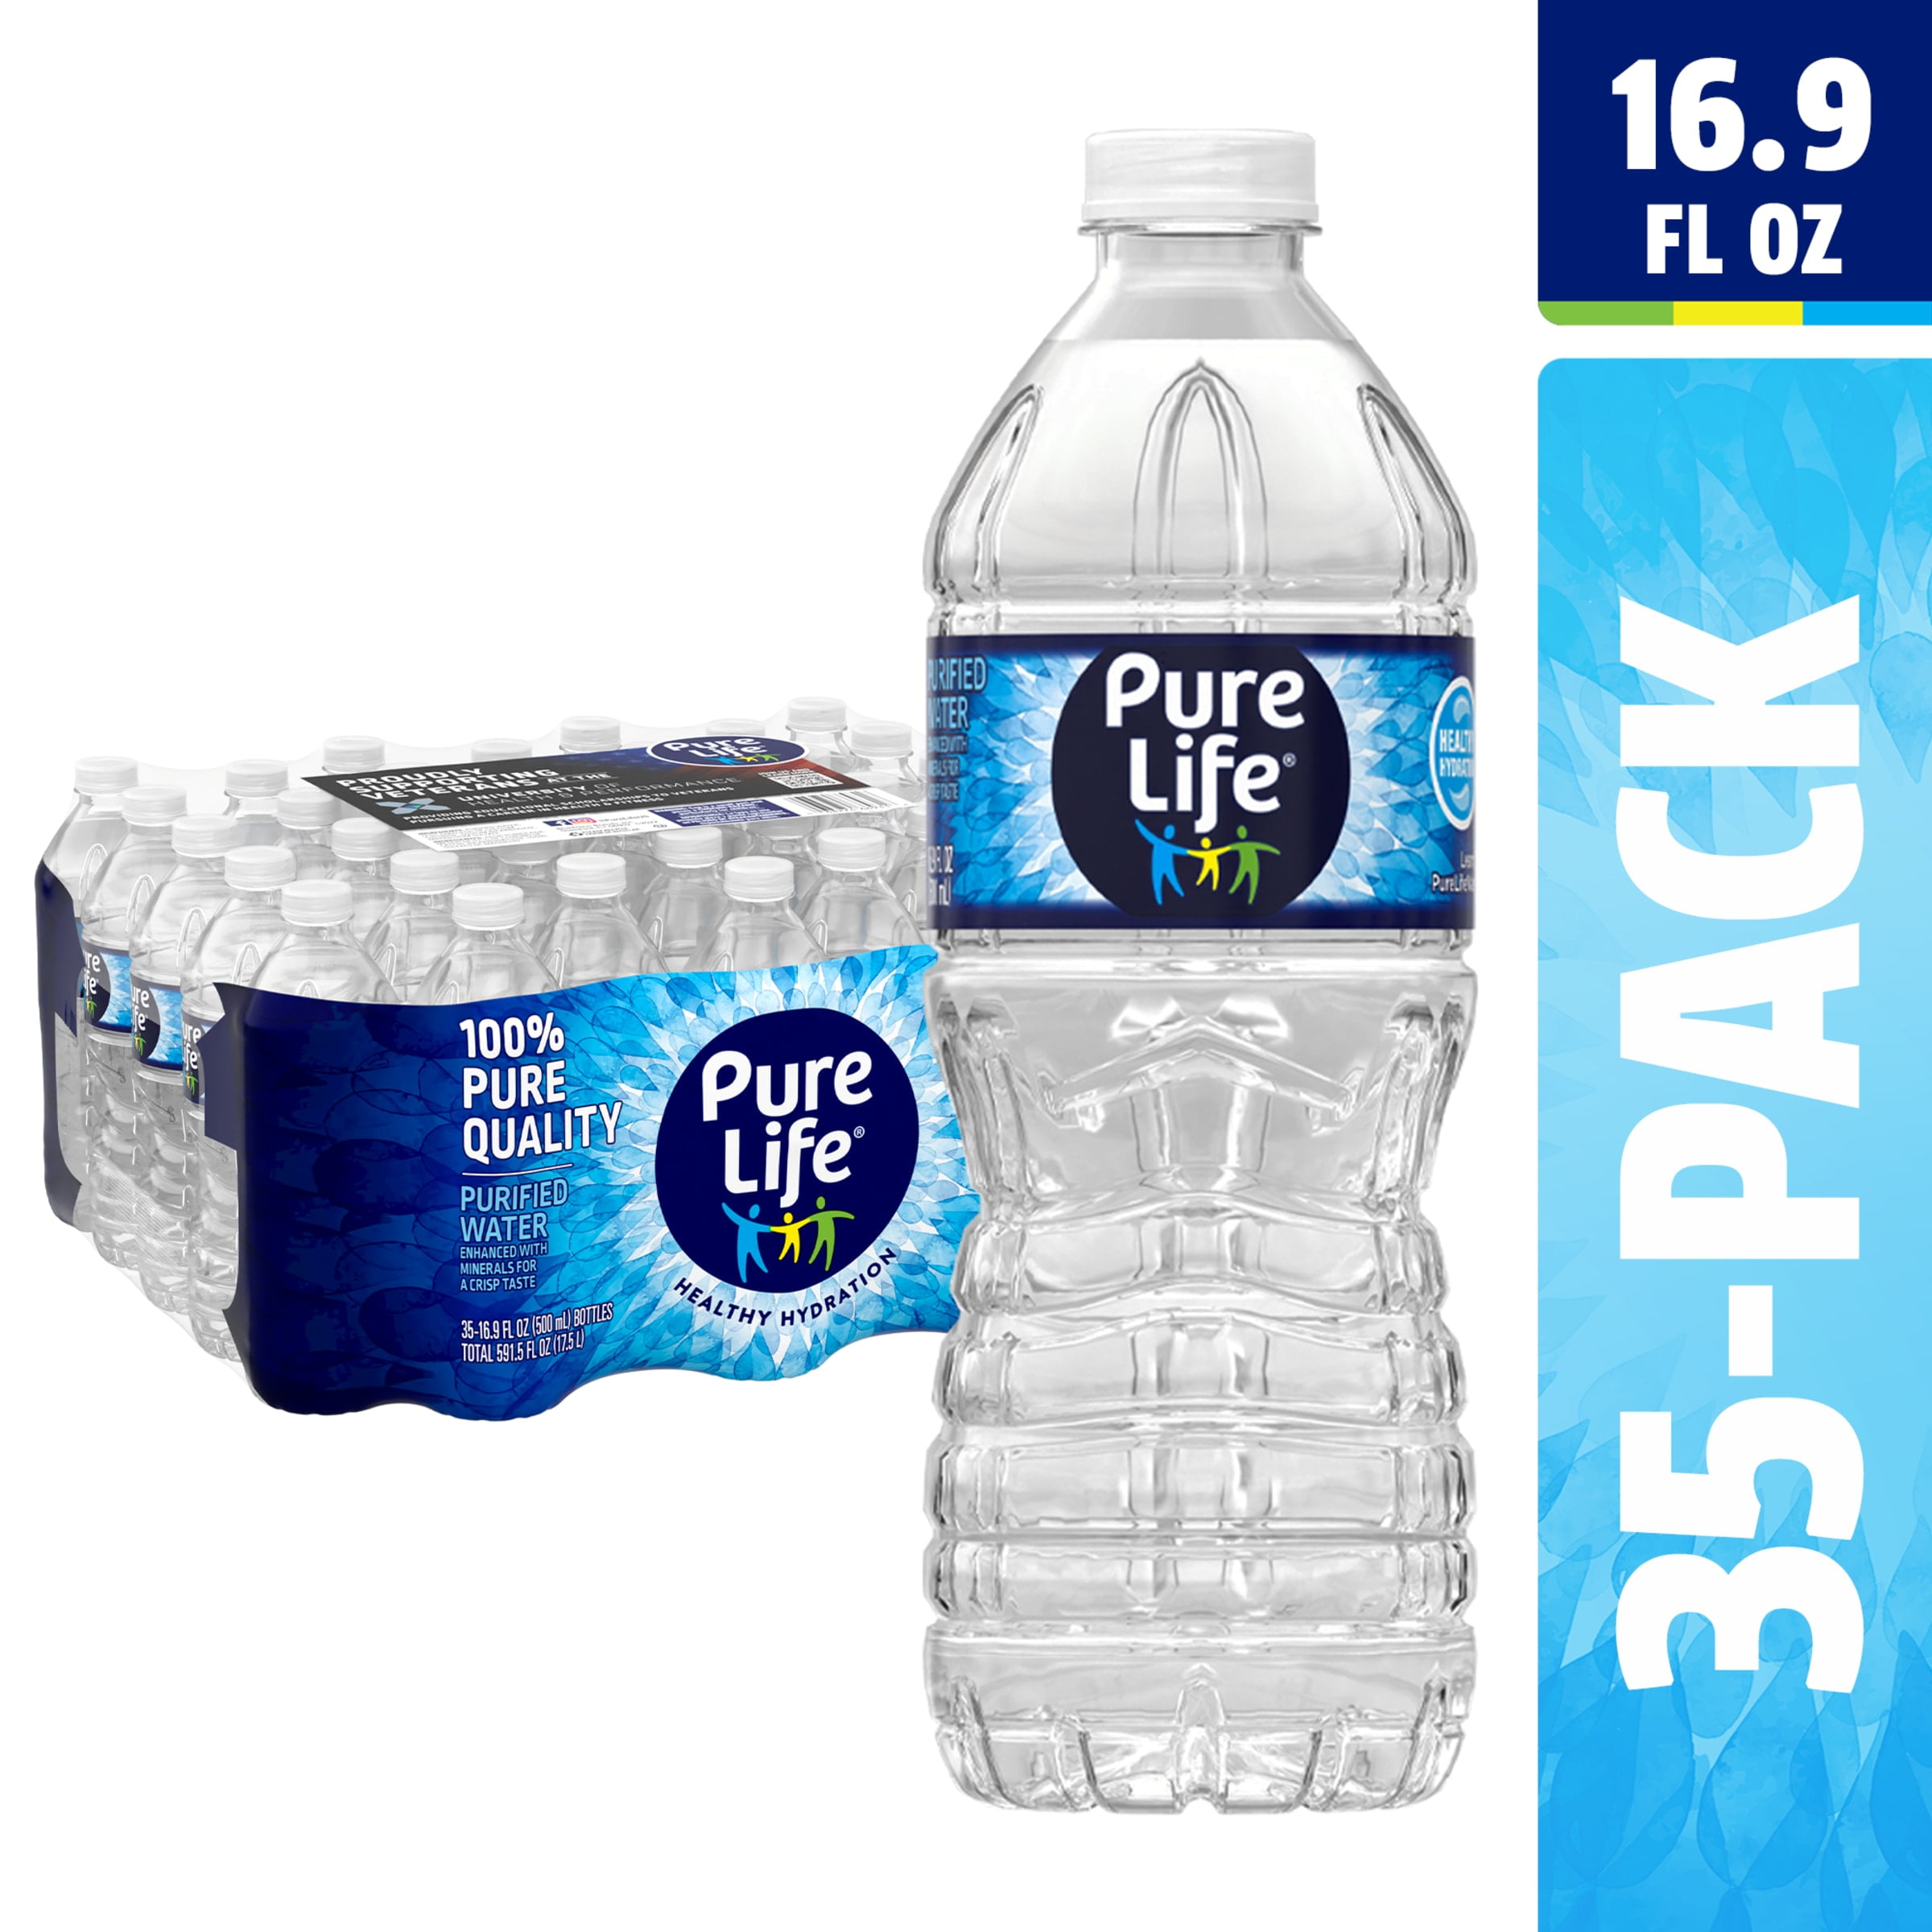 Pure Life Purified Water, 16.9 Fl Oz / 500 mL, Plastic Bottled